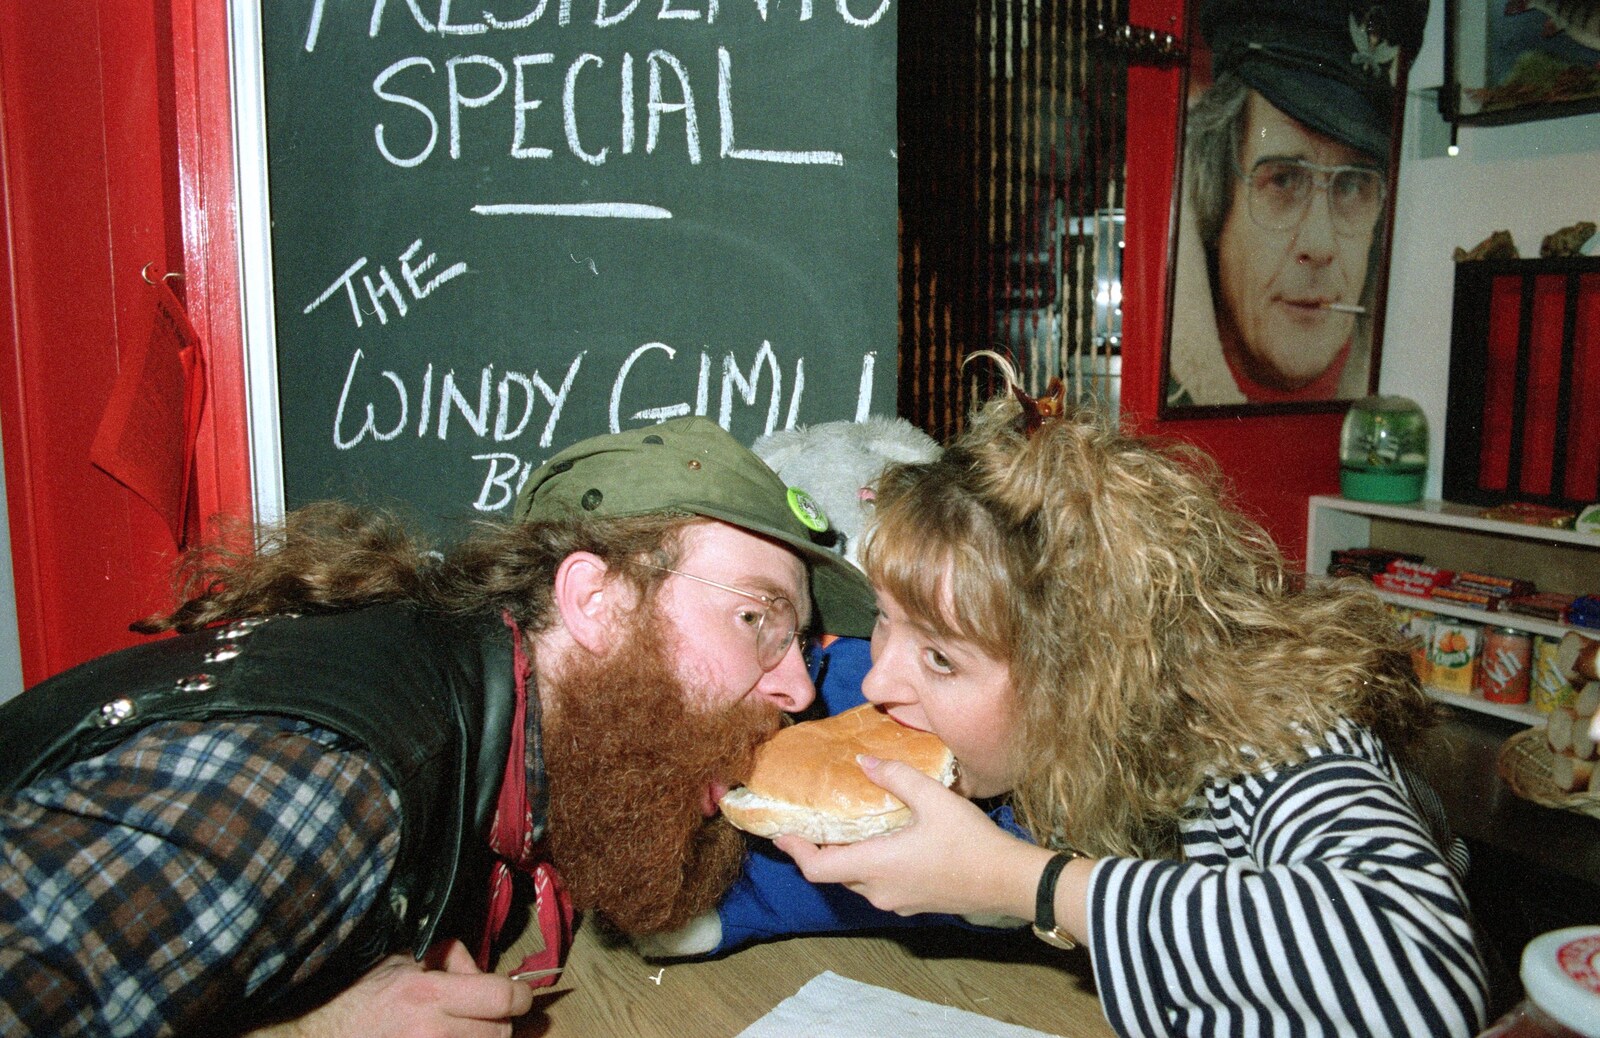 Gimli and Gus's hander share a burger from Uni: Gus Honeybun and the Windy Gimli Burger, Plymouth - 17th October 1988